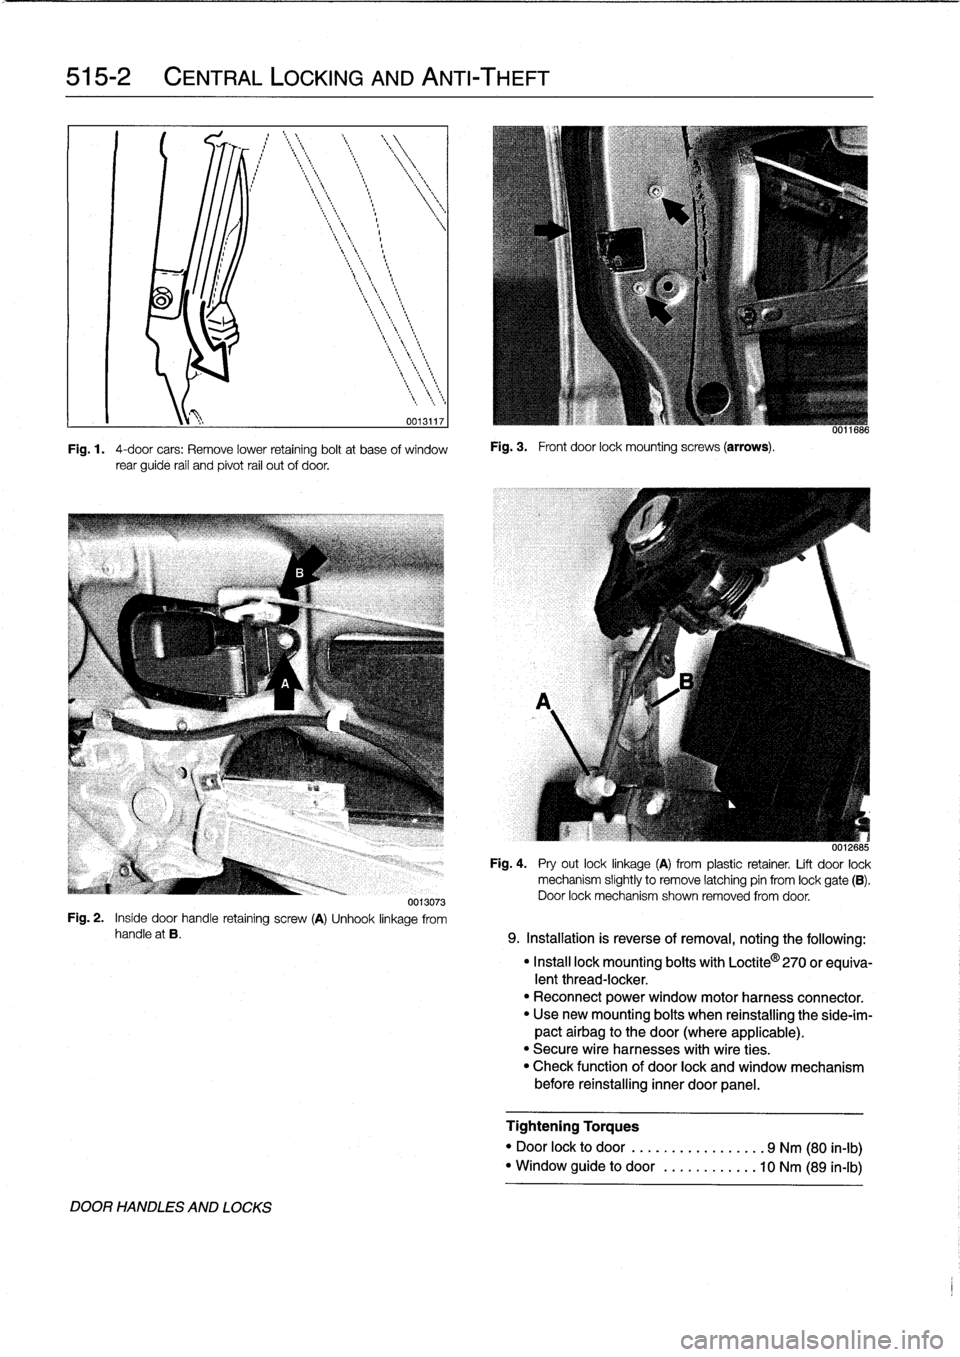 BMW 325i 1994 E36 Owners Manual 
515-2

	

CENTRAL
LOCKING
AND
ANTI-THEFT

0013117

Fig
.
1
.

	

4-door
cars
:
Remove
lower
retaining
boltat
base
of
window
rear
guide
rail
and
pivot
rail
out
of
door
.

Fig
.
3
.

	

Front
door
lock